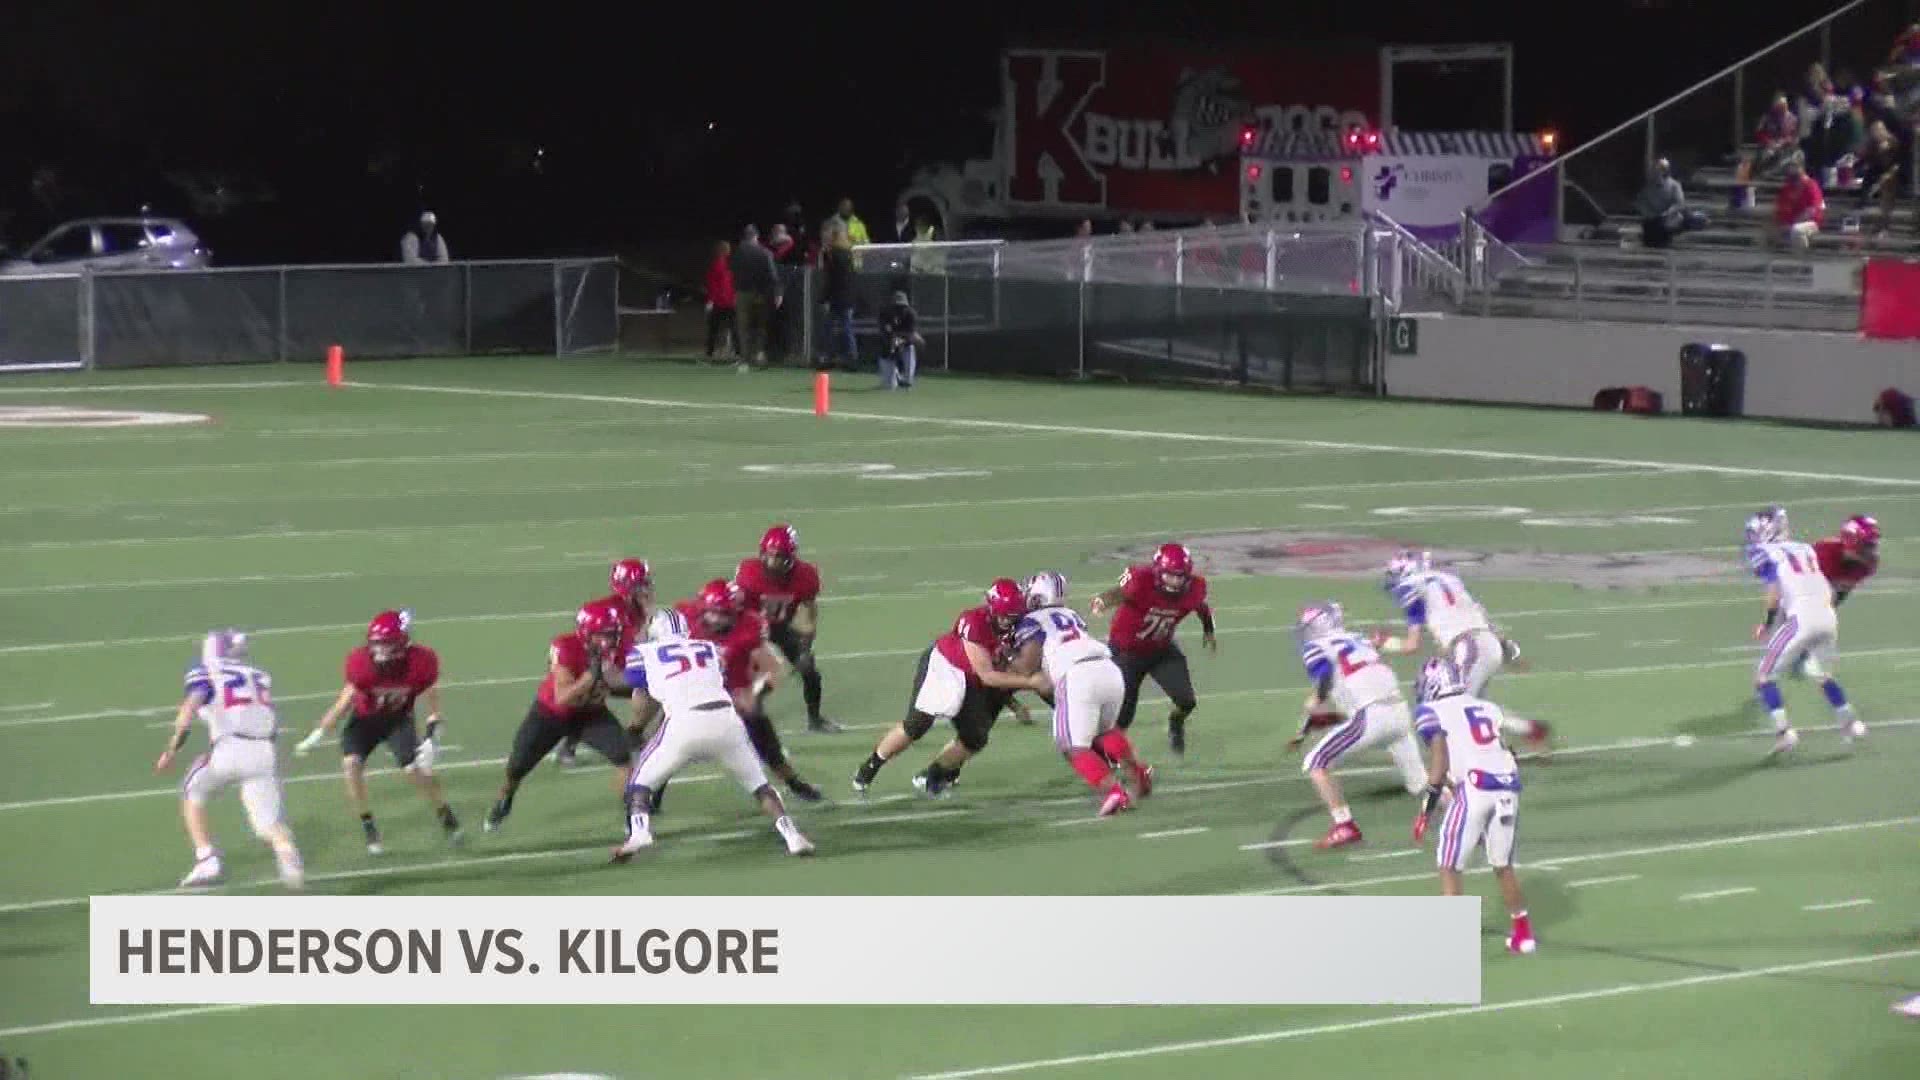 Kilgore came away with the win, topping Henderson 35-9.